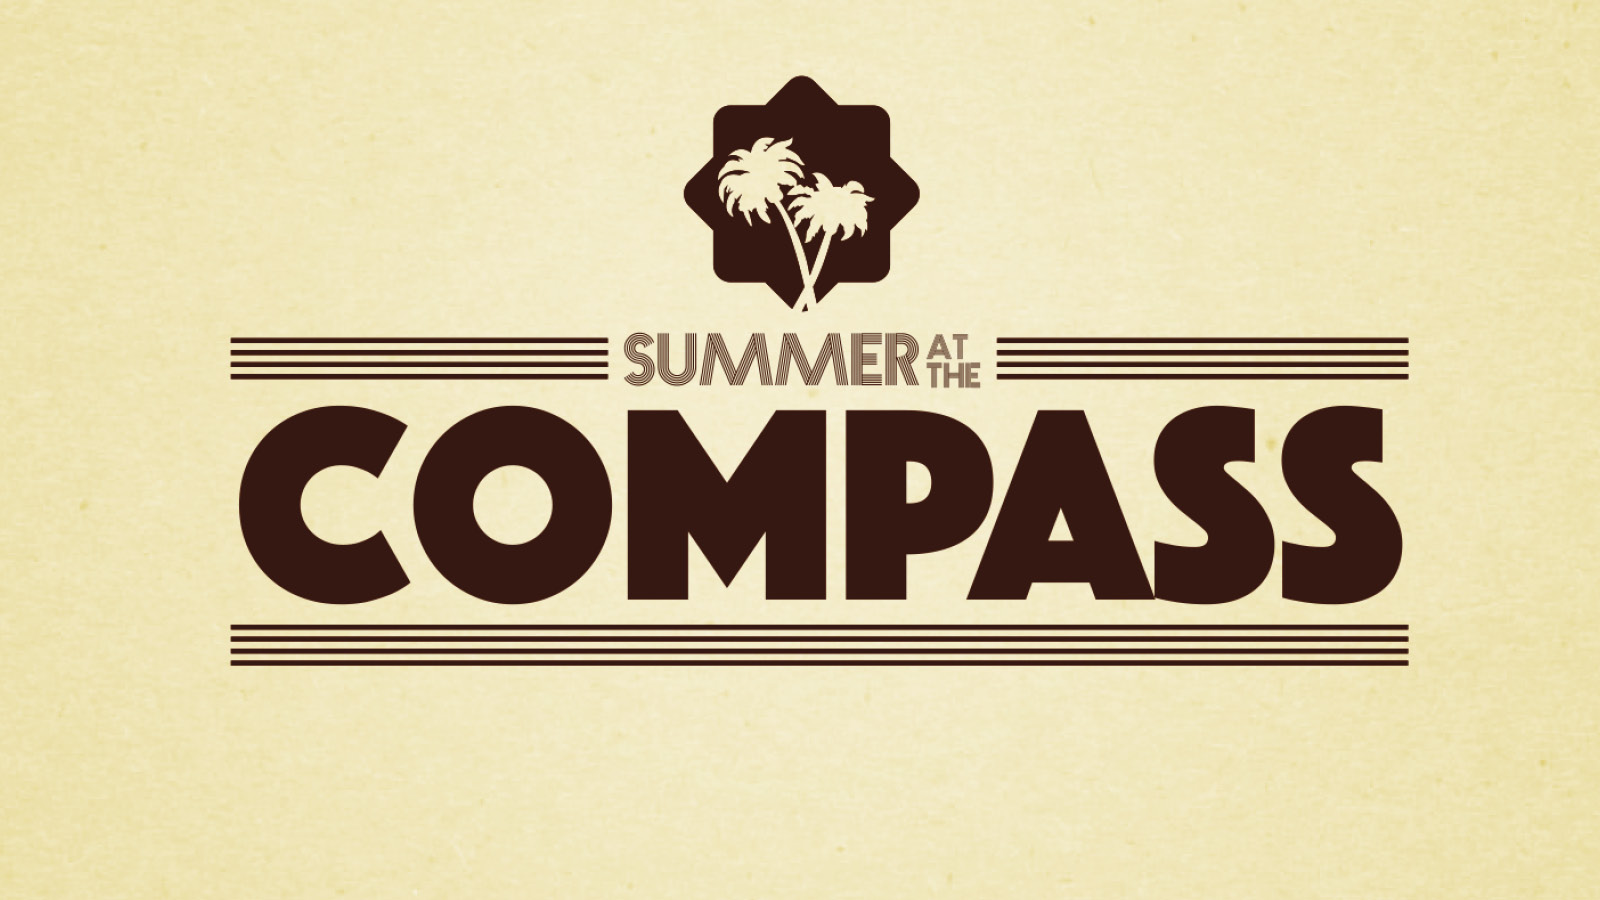 Summer at The Compass Church